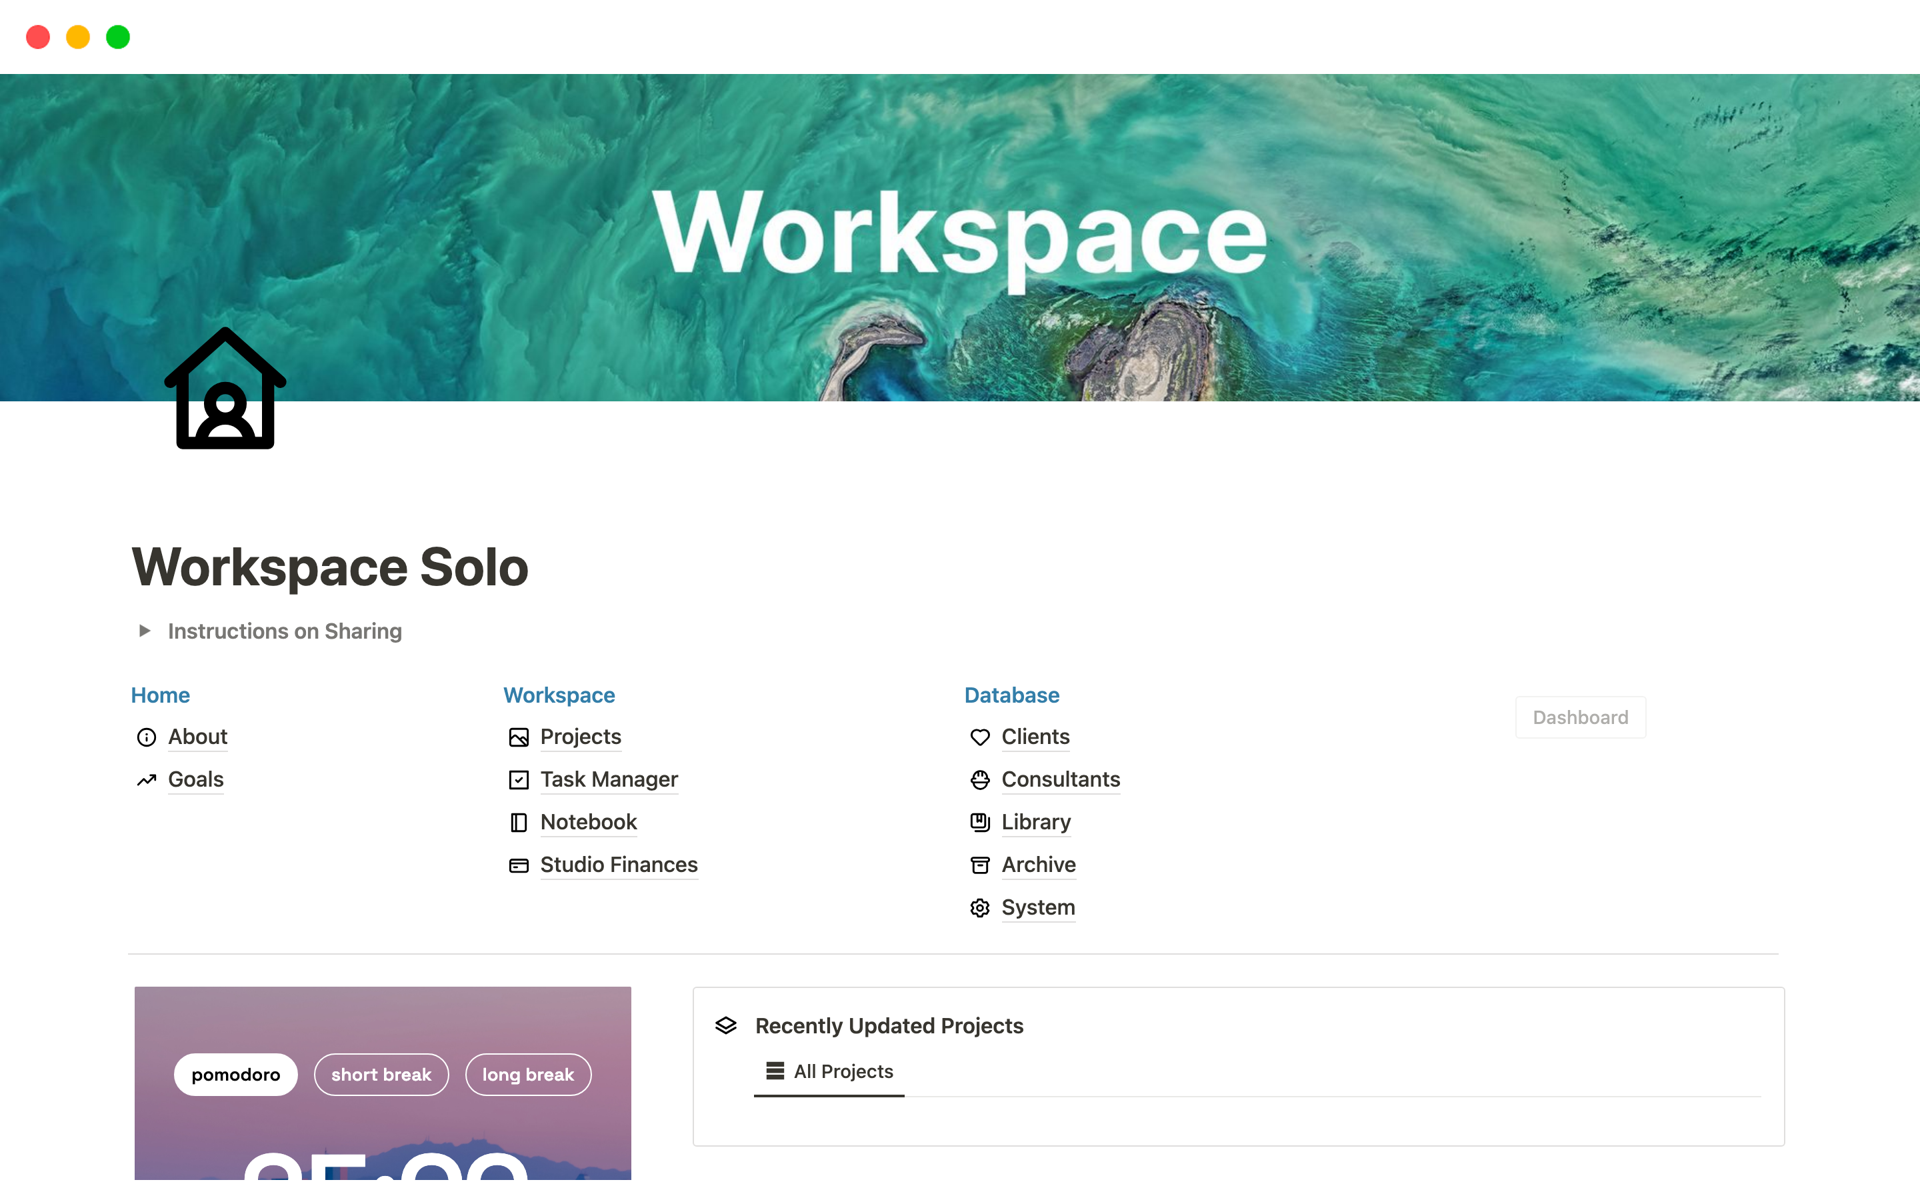 Workspace Solo is a project management tool designed specifically for individual architects and freelancers who need a comprehensive tool to manage their architecture projects.